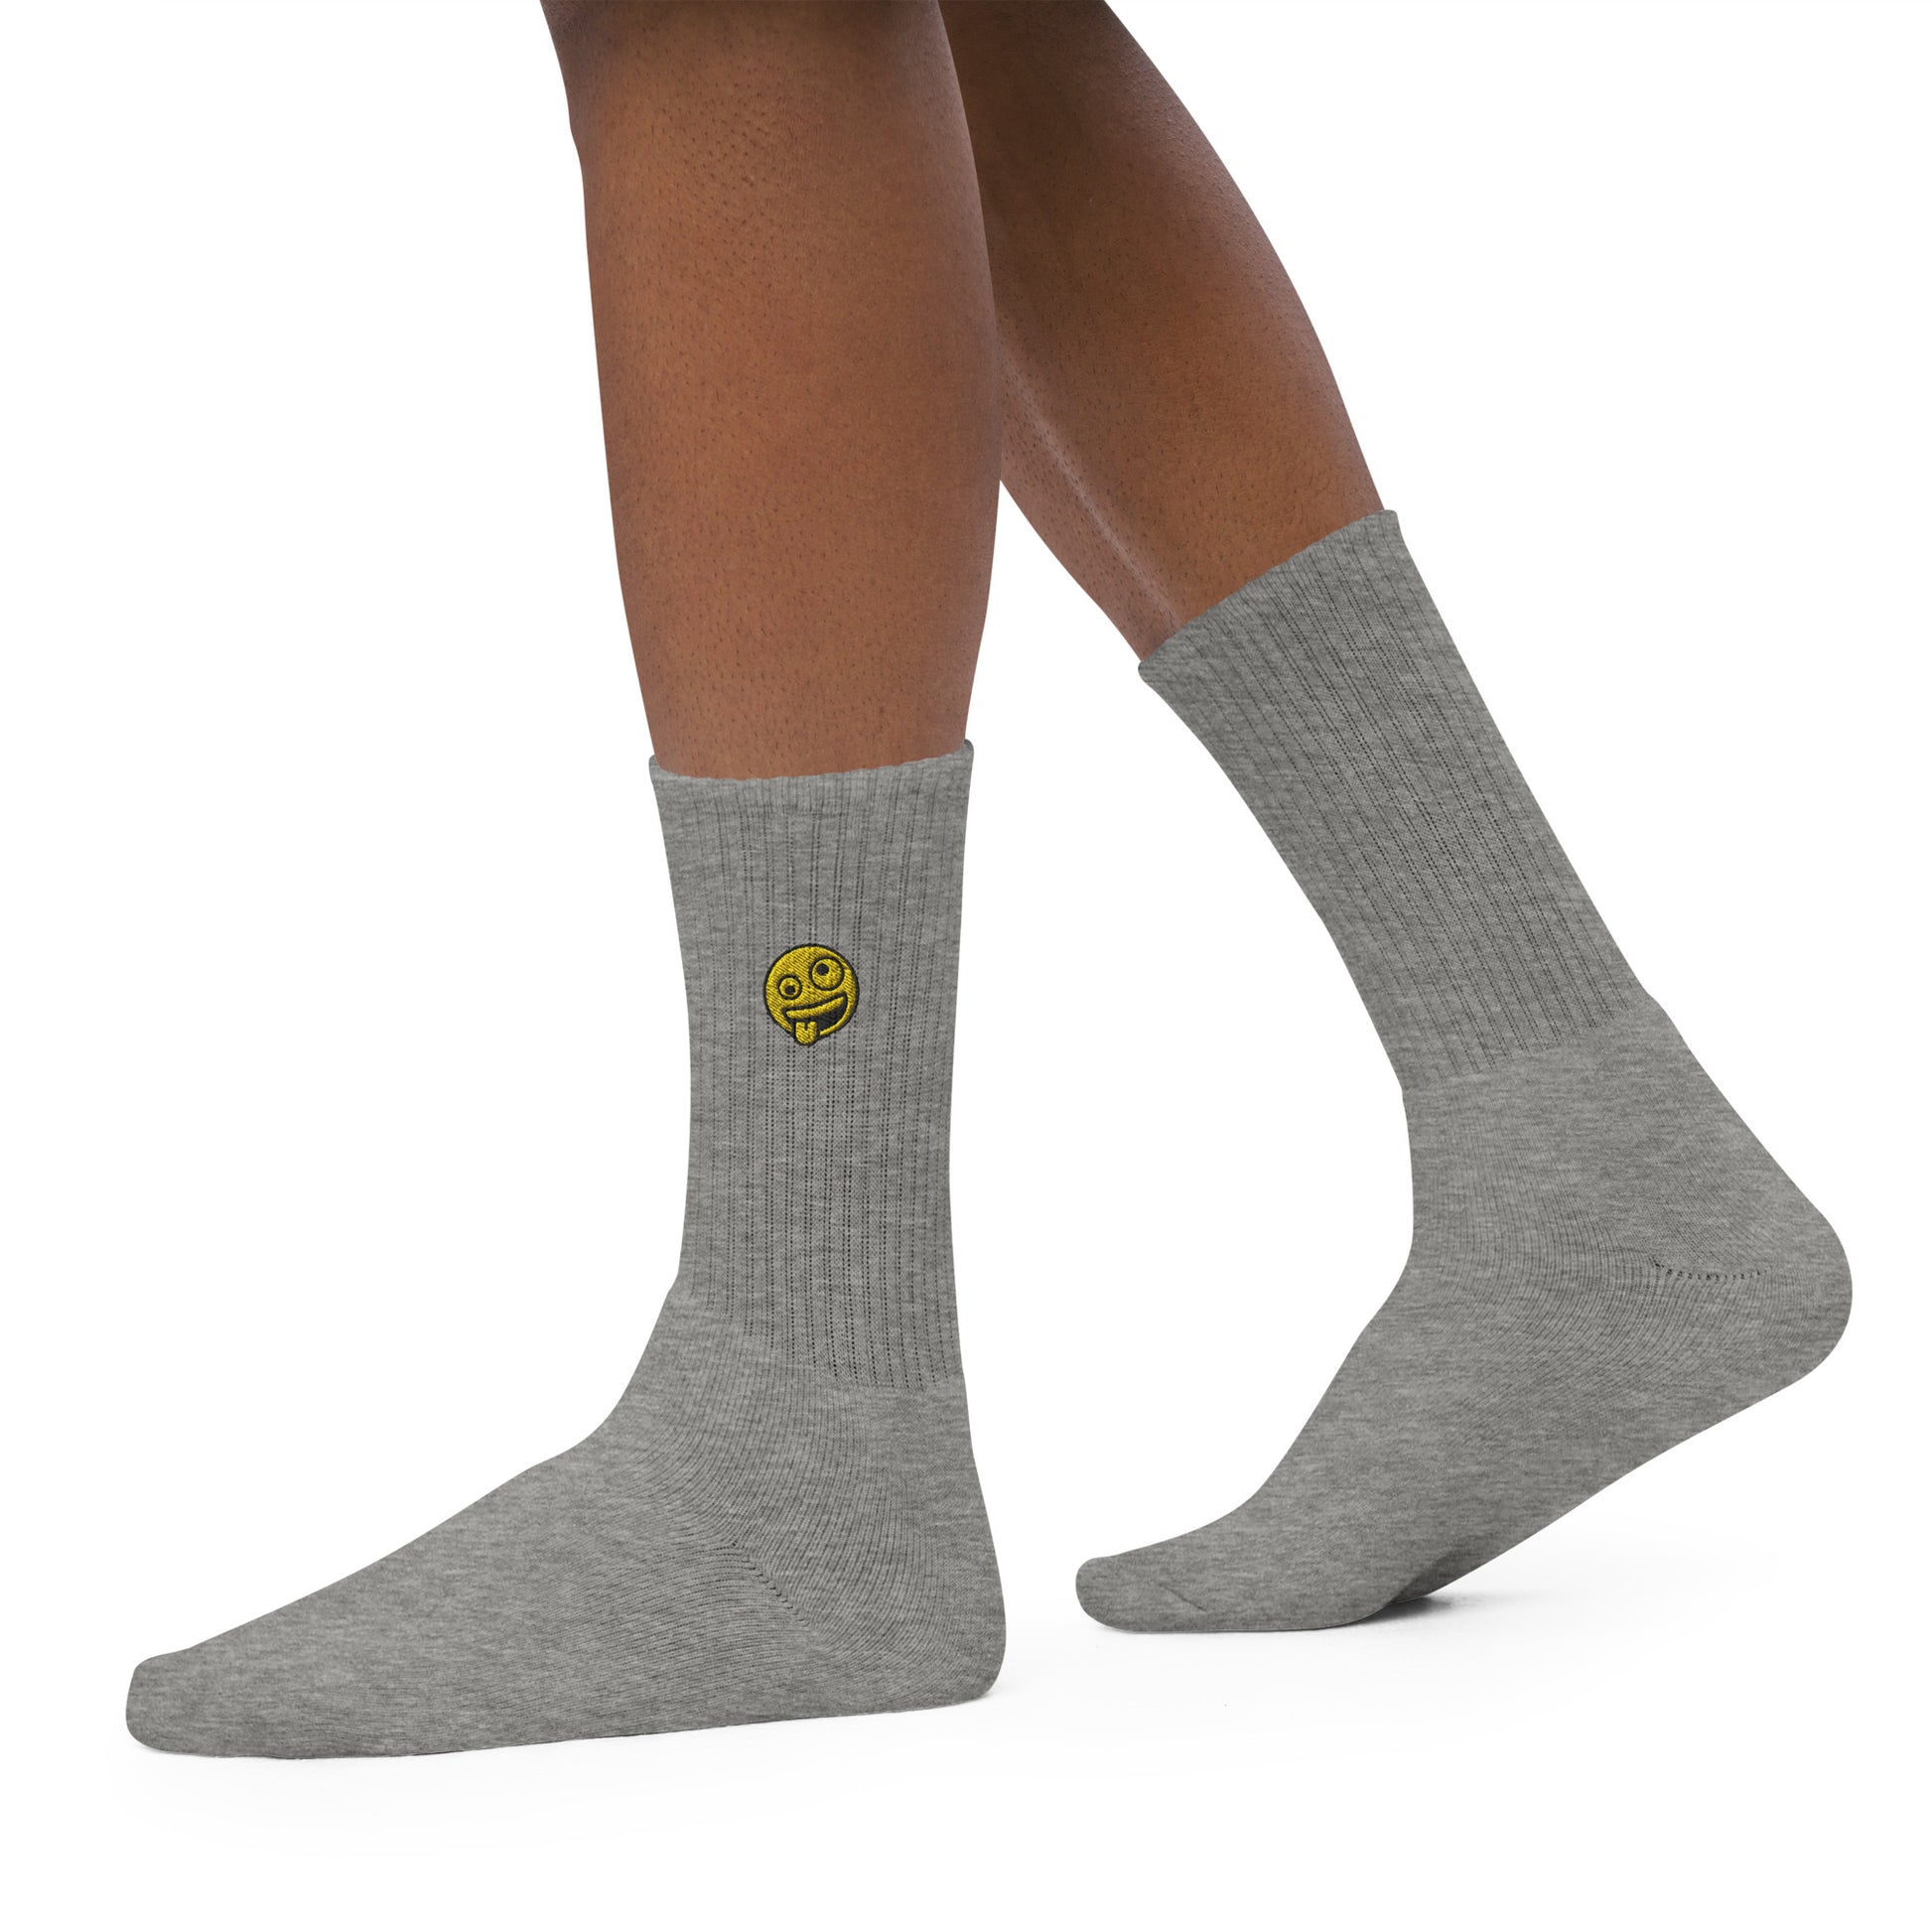 socks-from-the-side-with-emoji-symbol